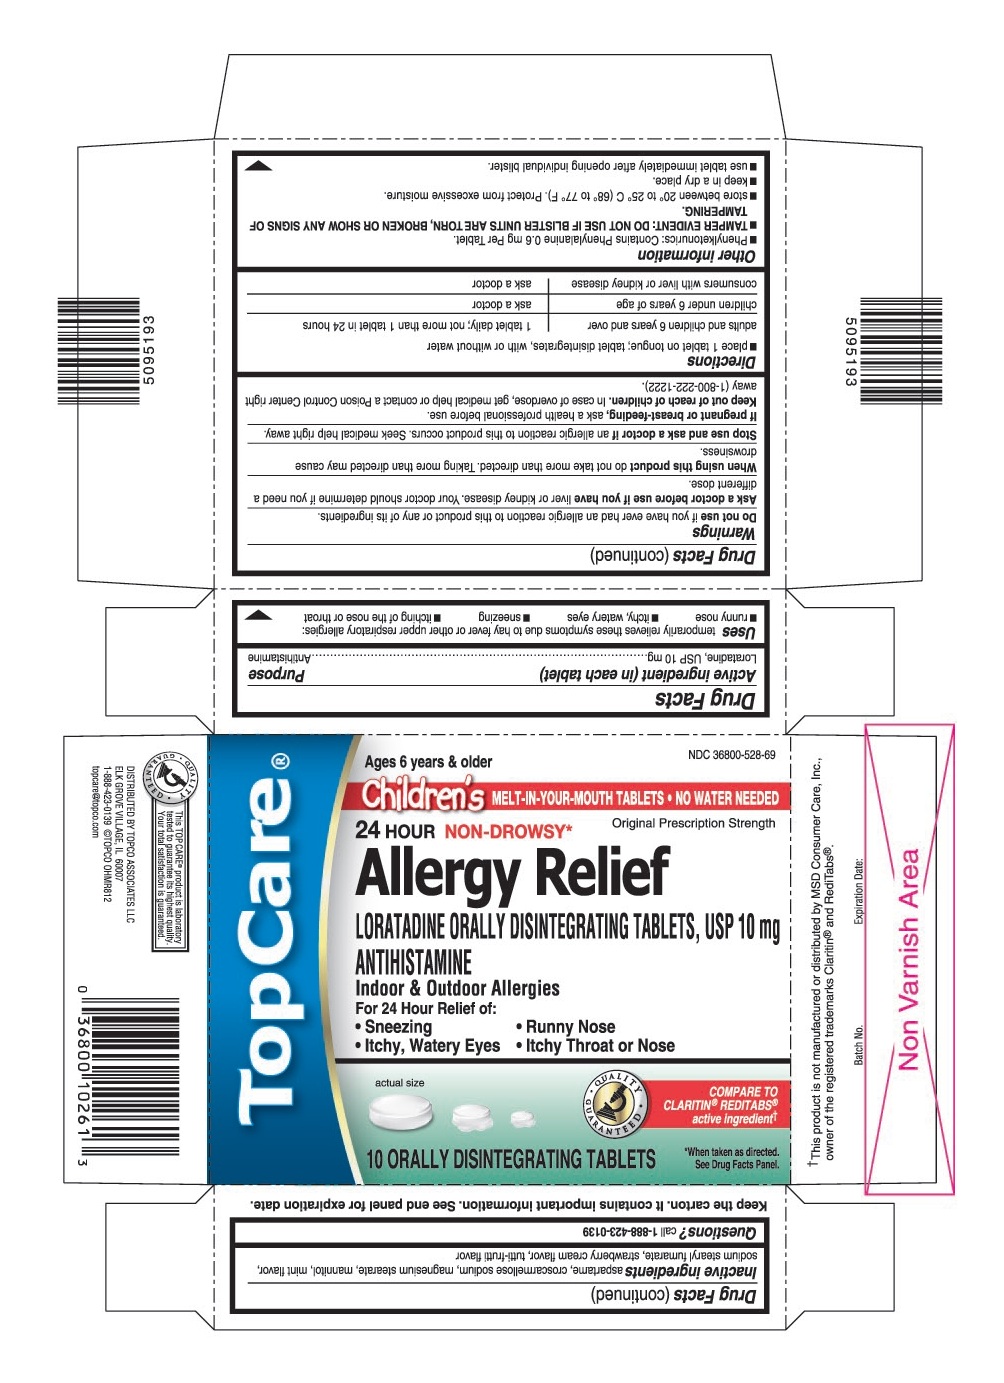 This is the 10 count blister carton label for TopCare Loratadine ODT, USP 10 mg (Children's).